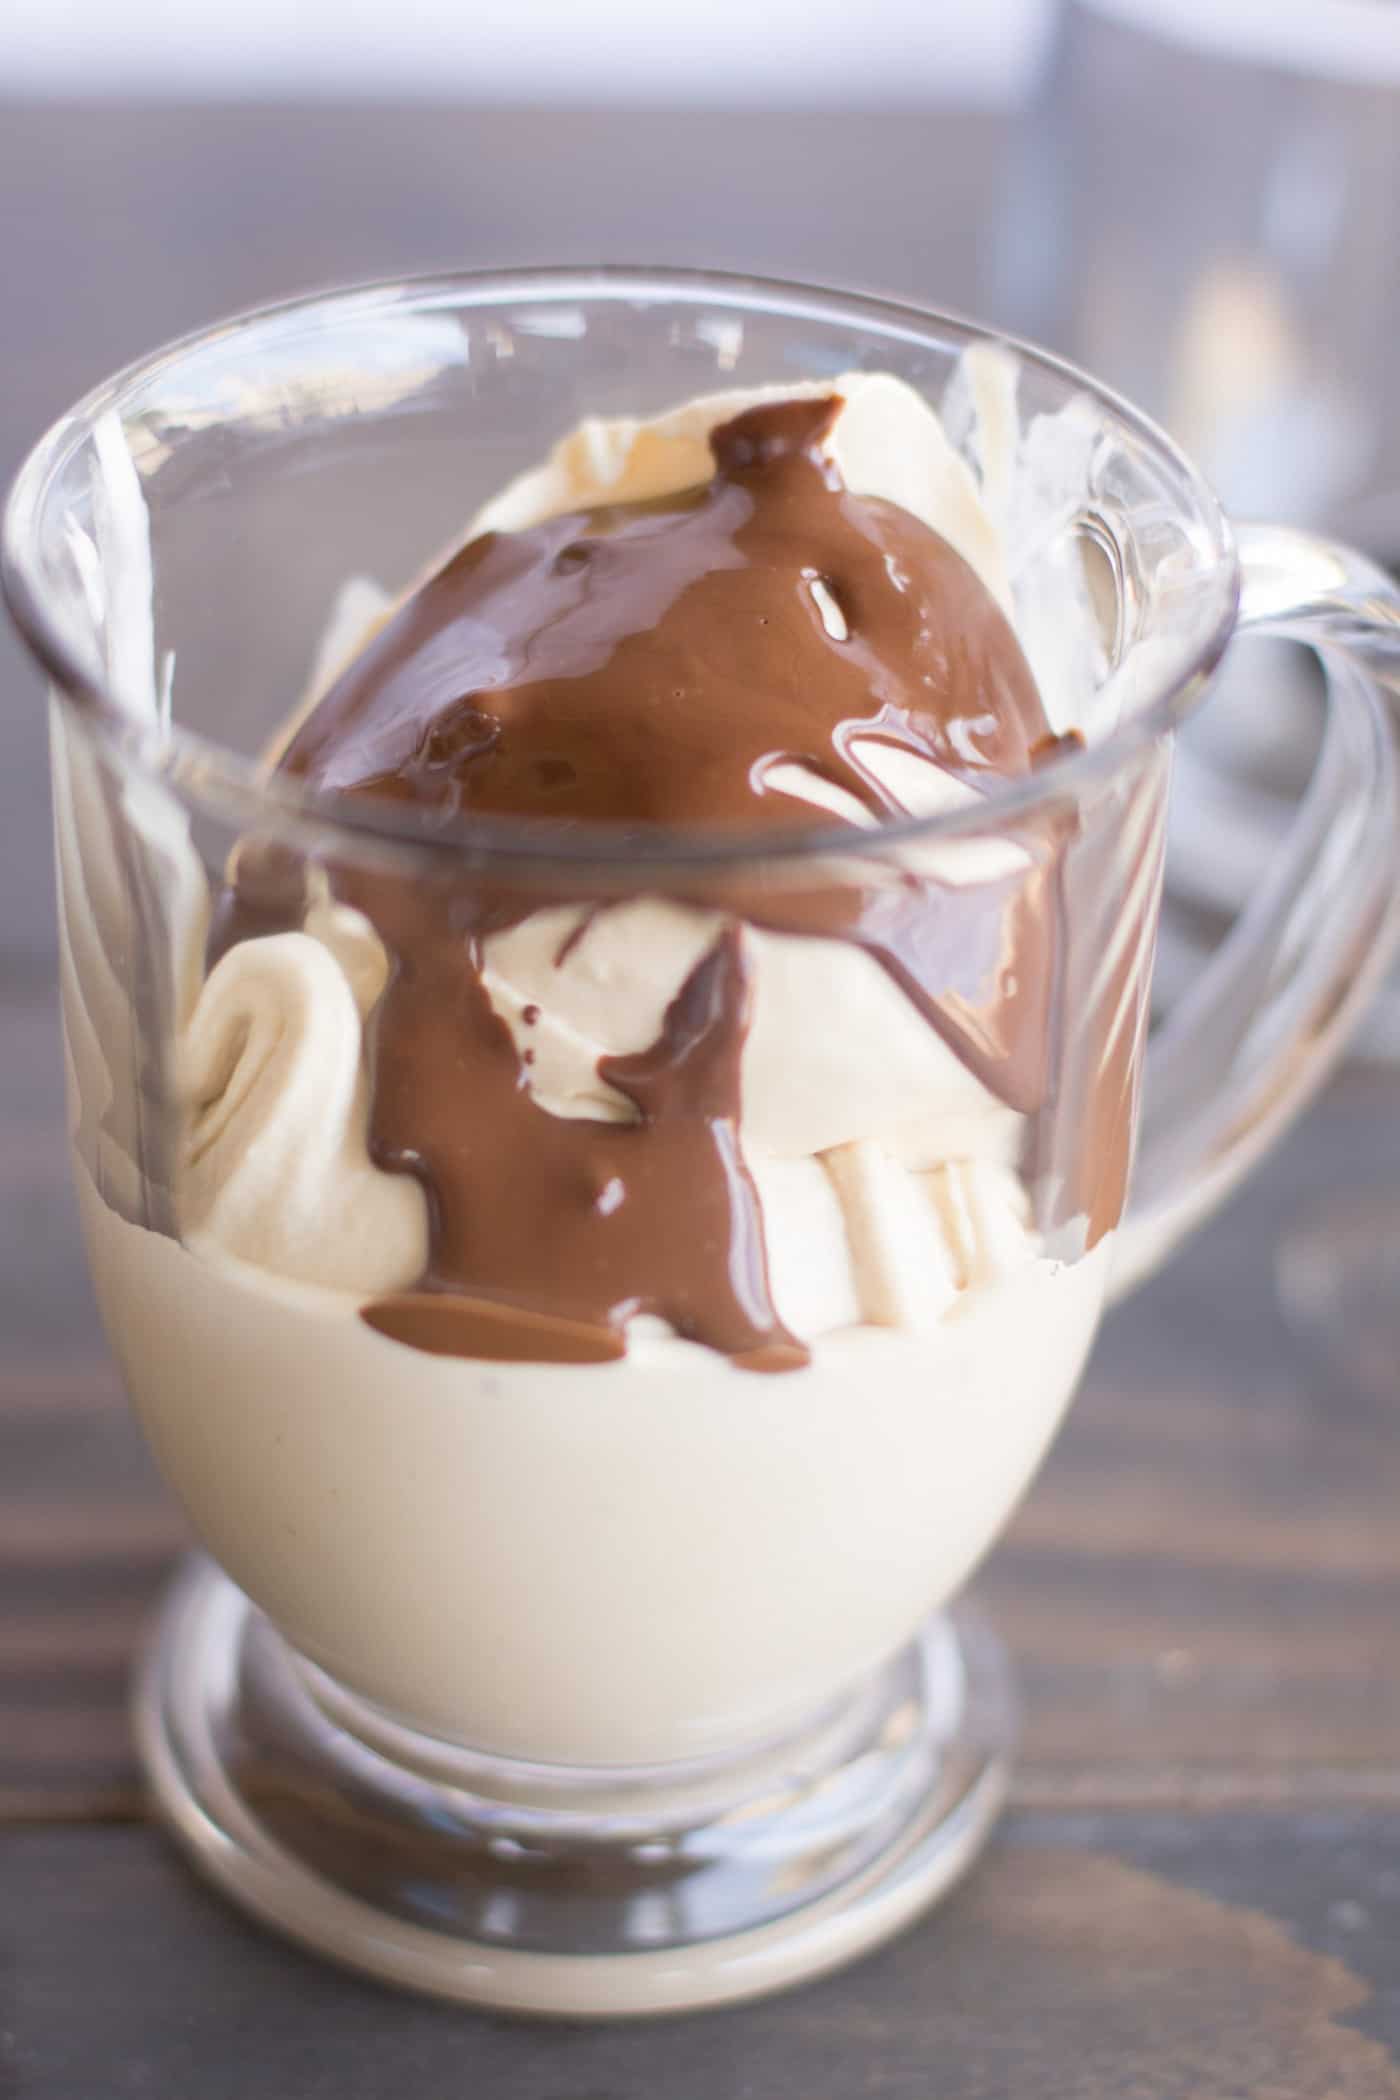 This Bailey's ice cream recipe is a delicious combination of flavors. You'll definitely want to add chocolate sauce to the top of this boozy treat!